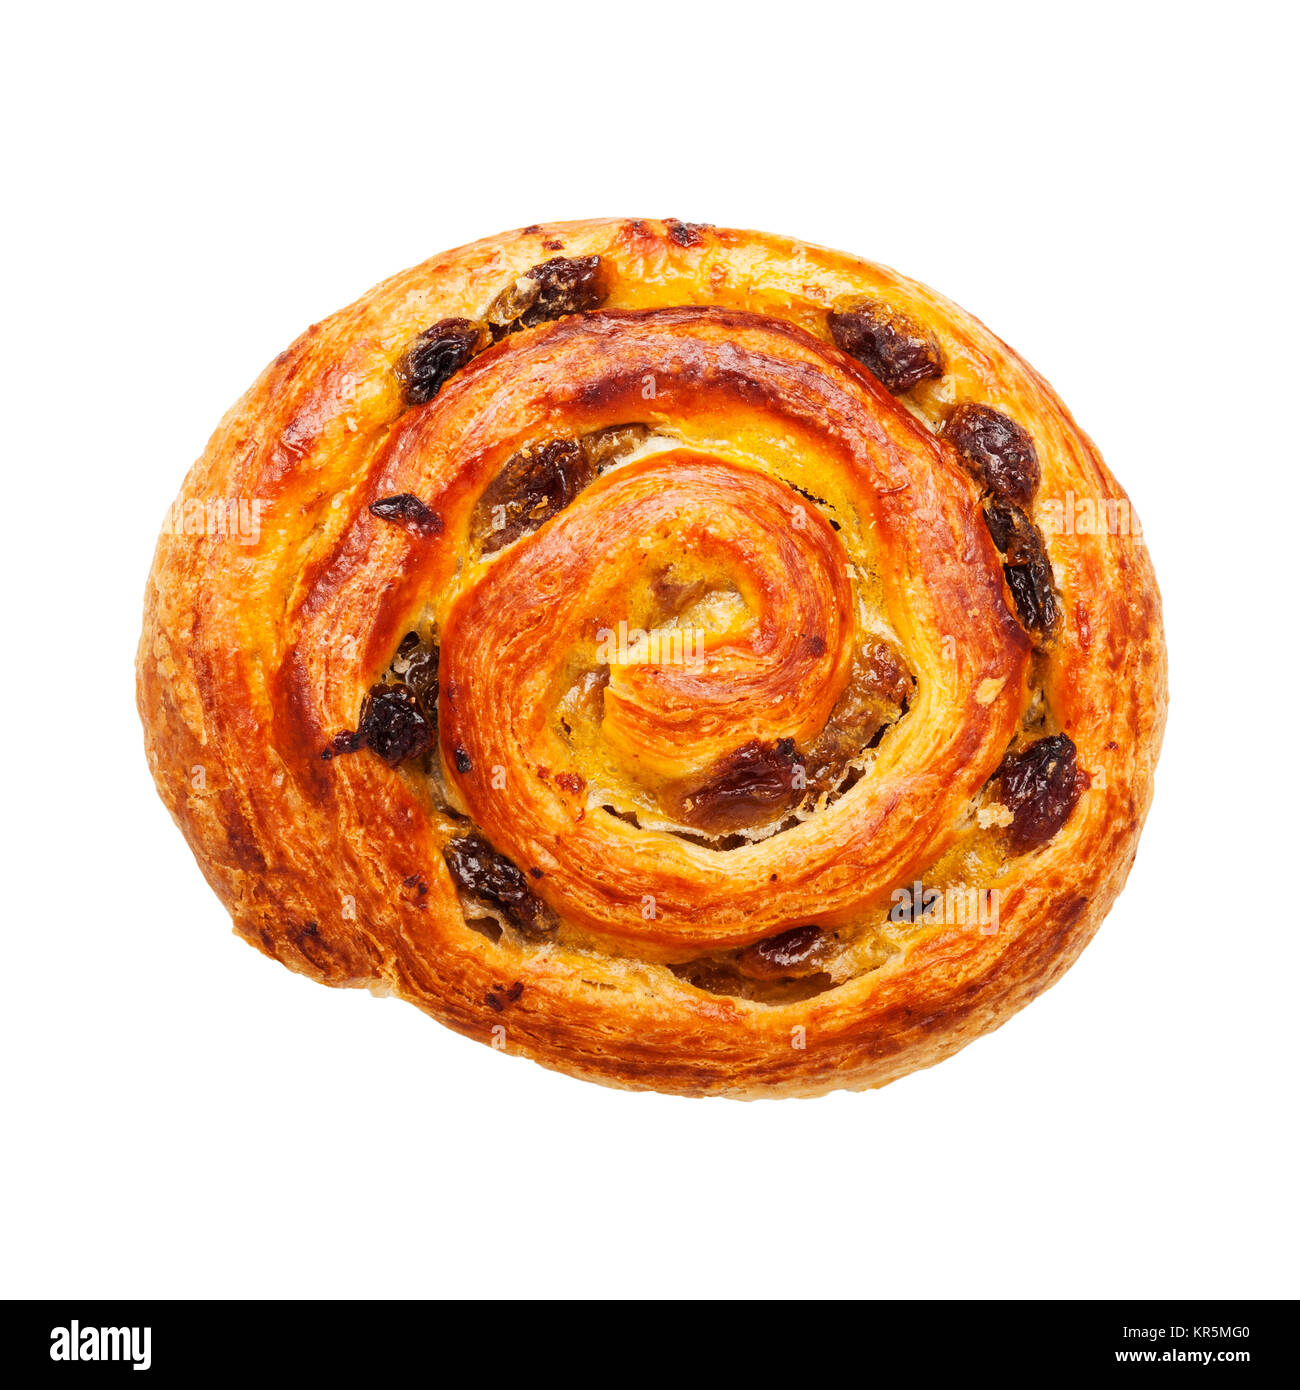 A Pain aux raisin pastry on a white background Stock Photo